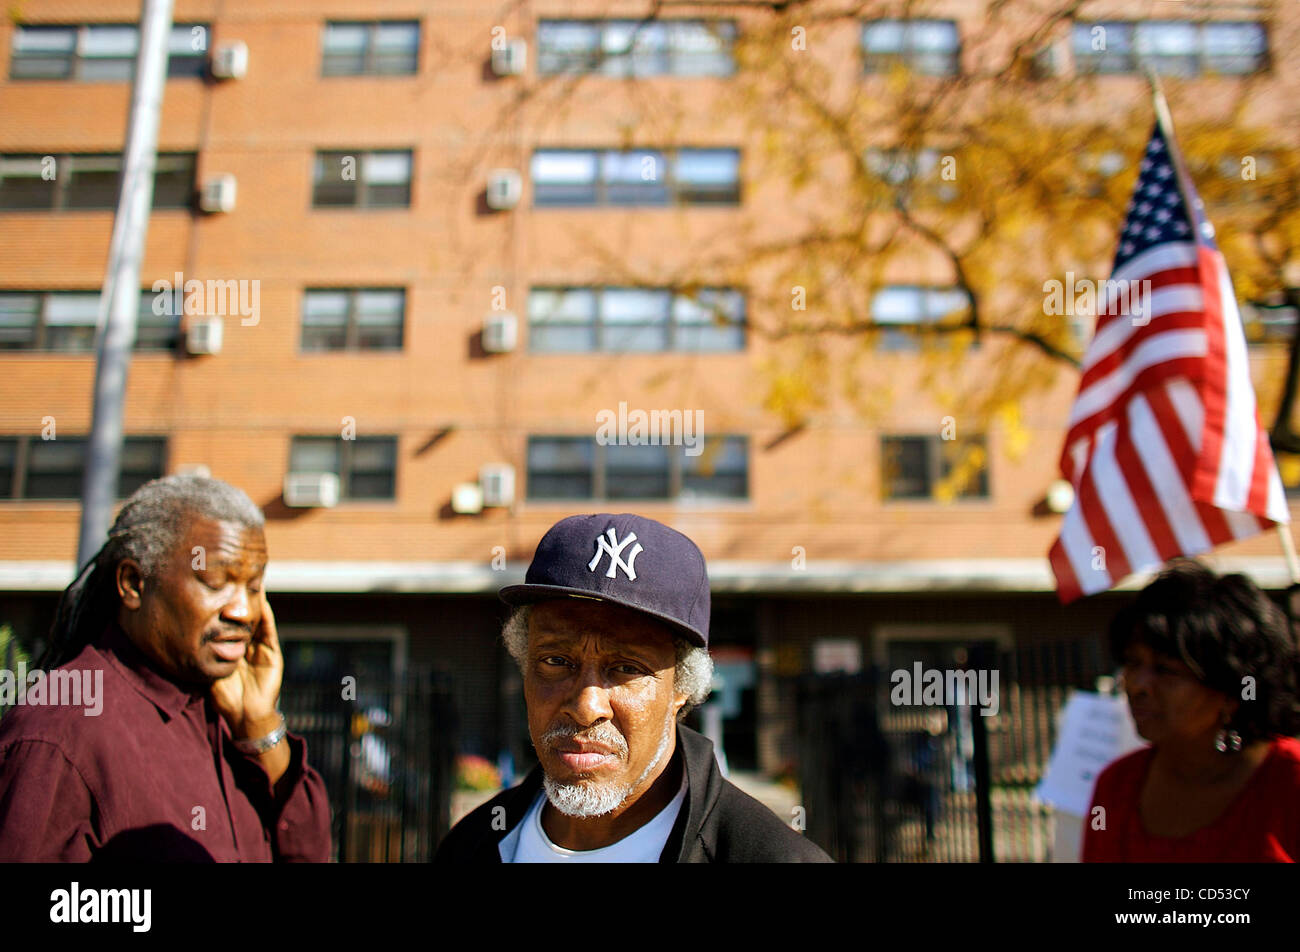 A poll worker in South Chicago waits outside for voters on election day. of people for the historic event.. Stock Photo